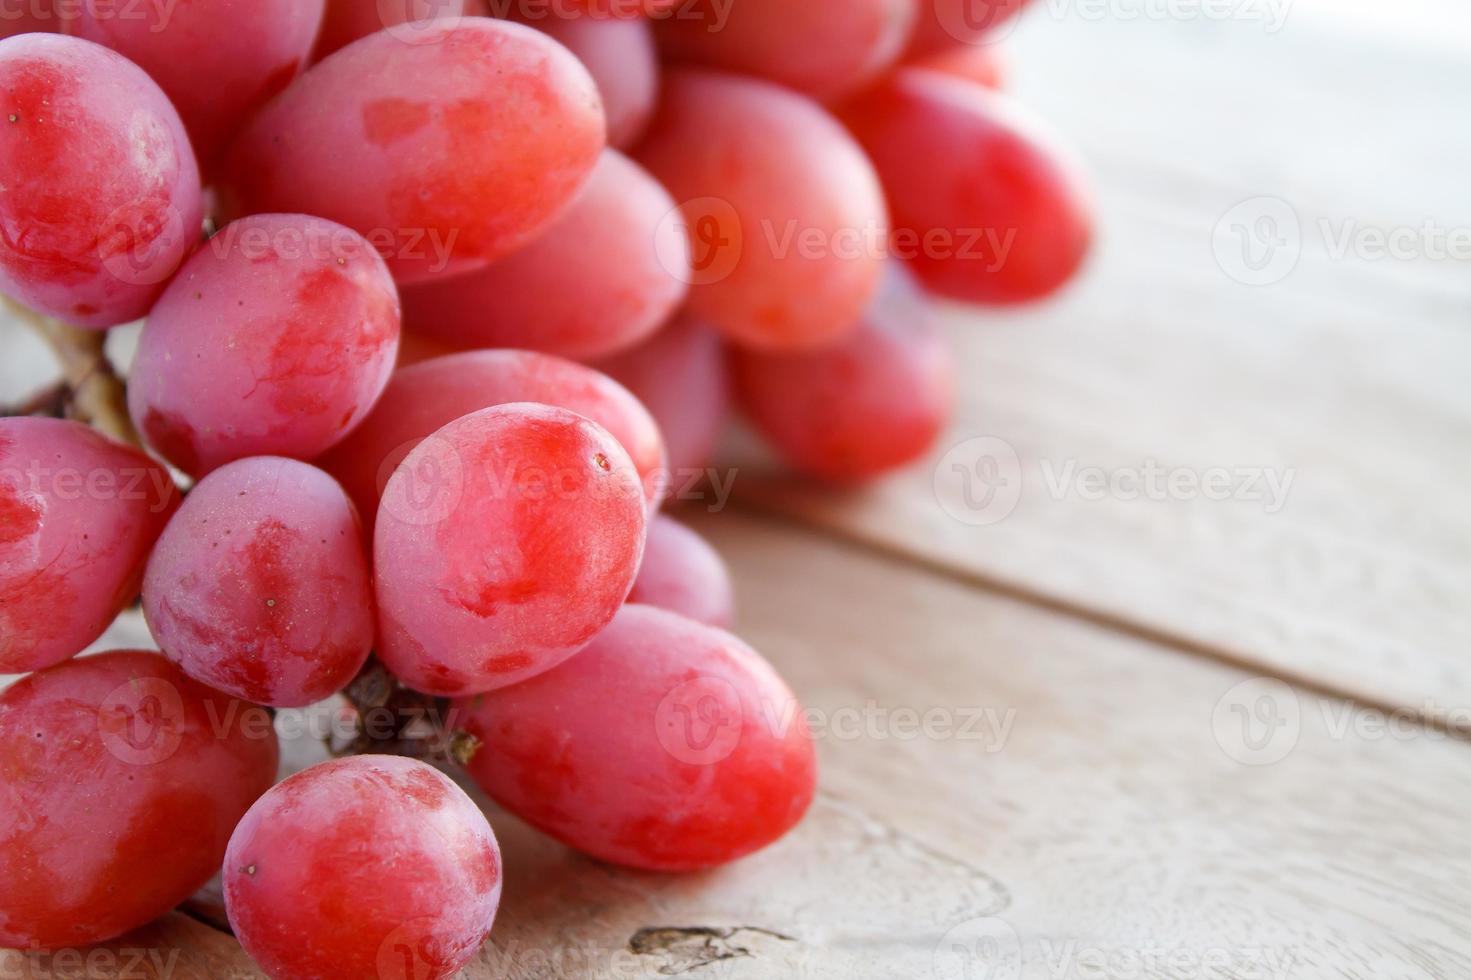 red grapes on wooden background photo